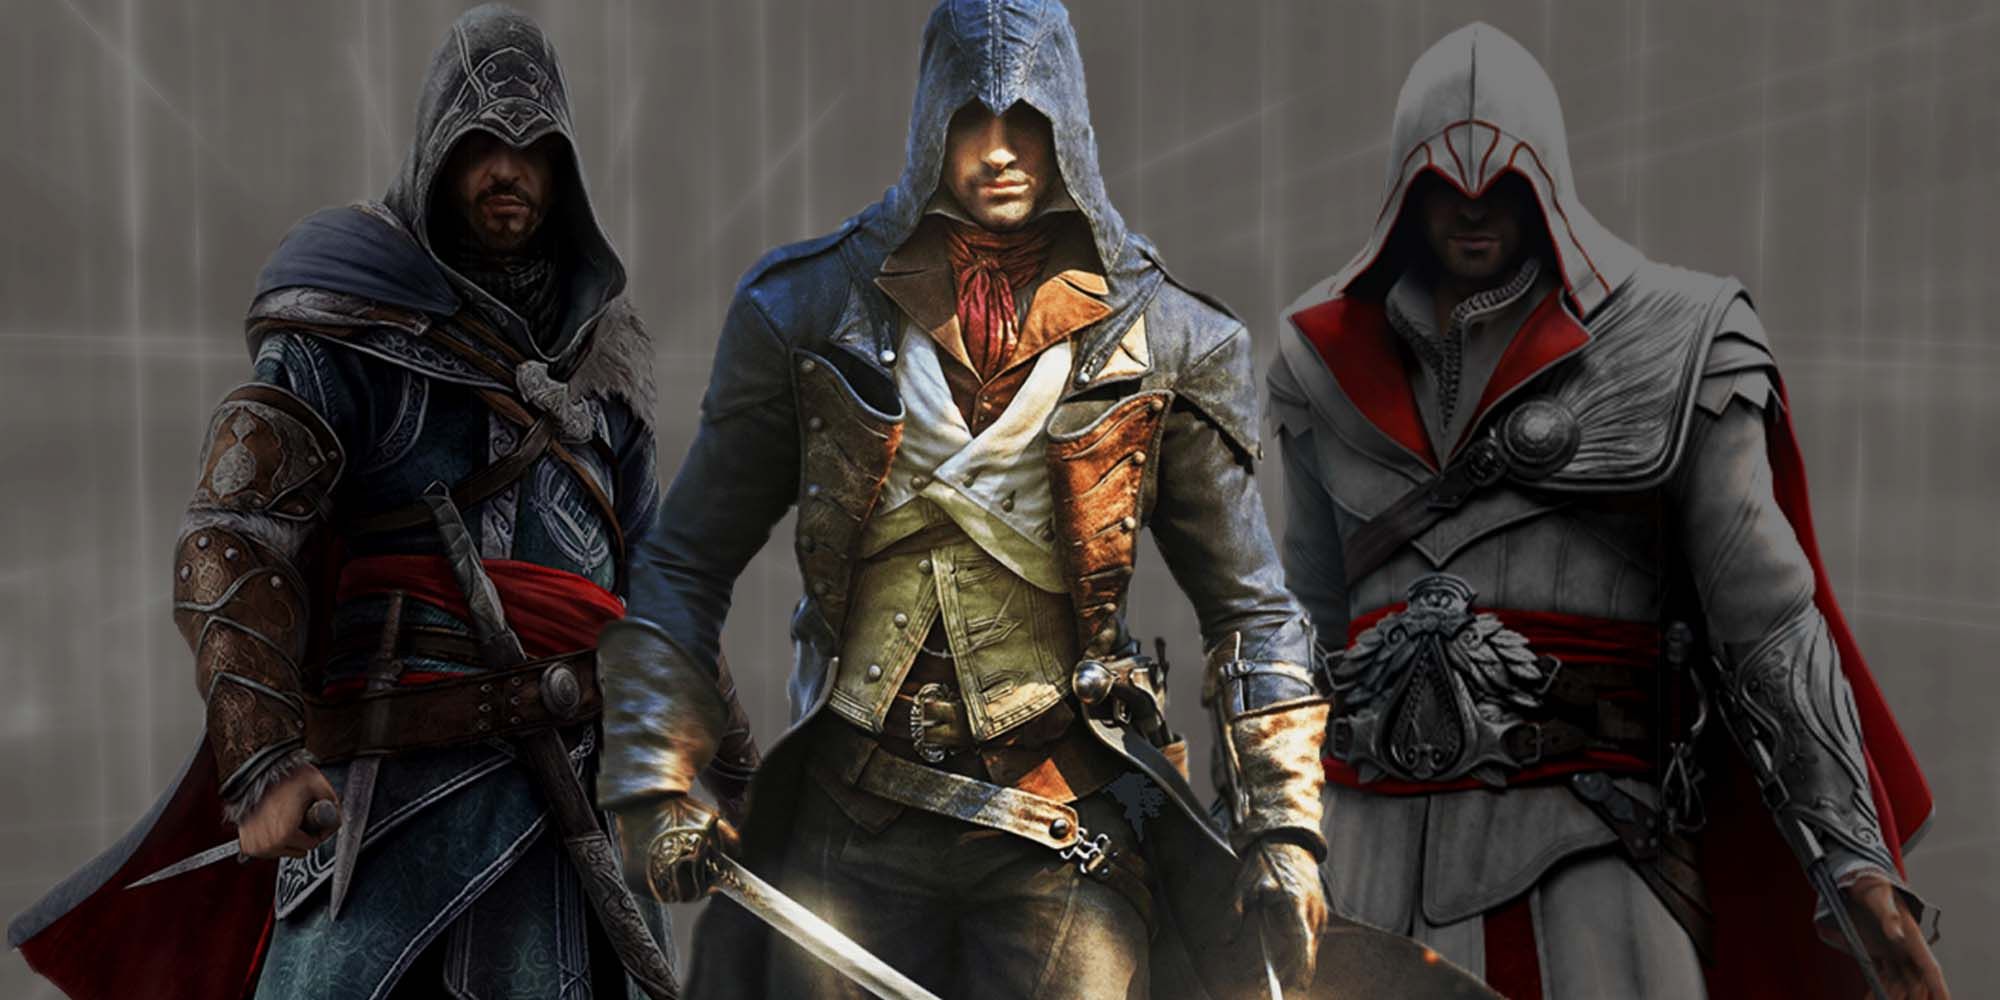 Is Arno one of the best assassins?